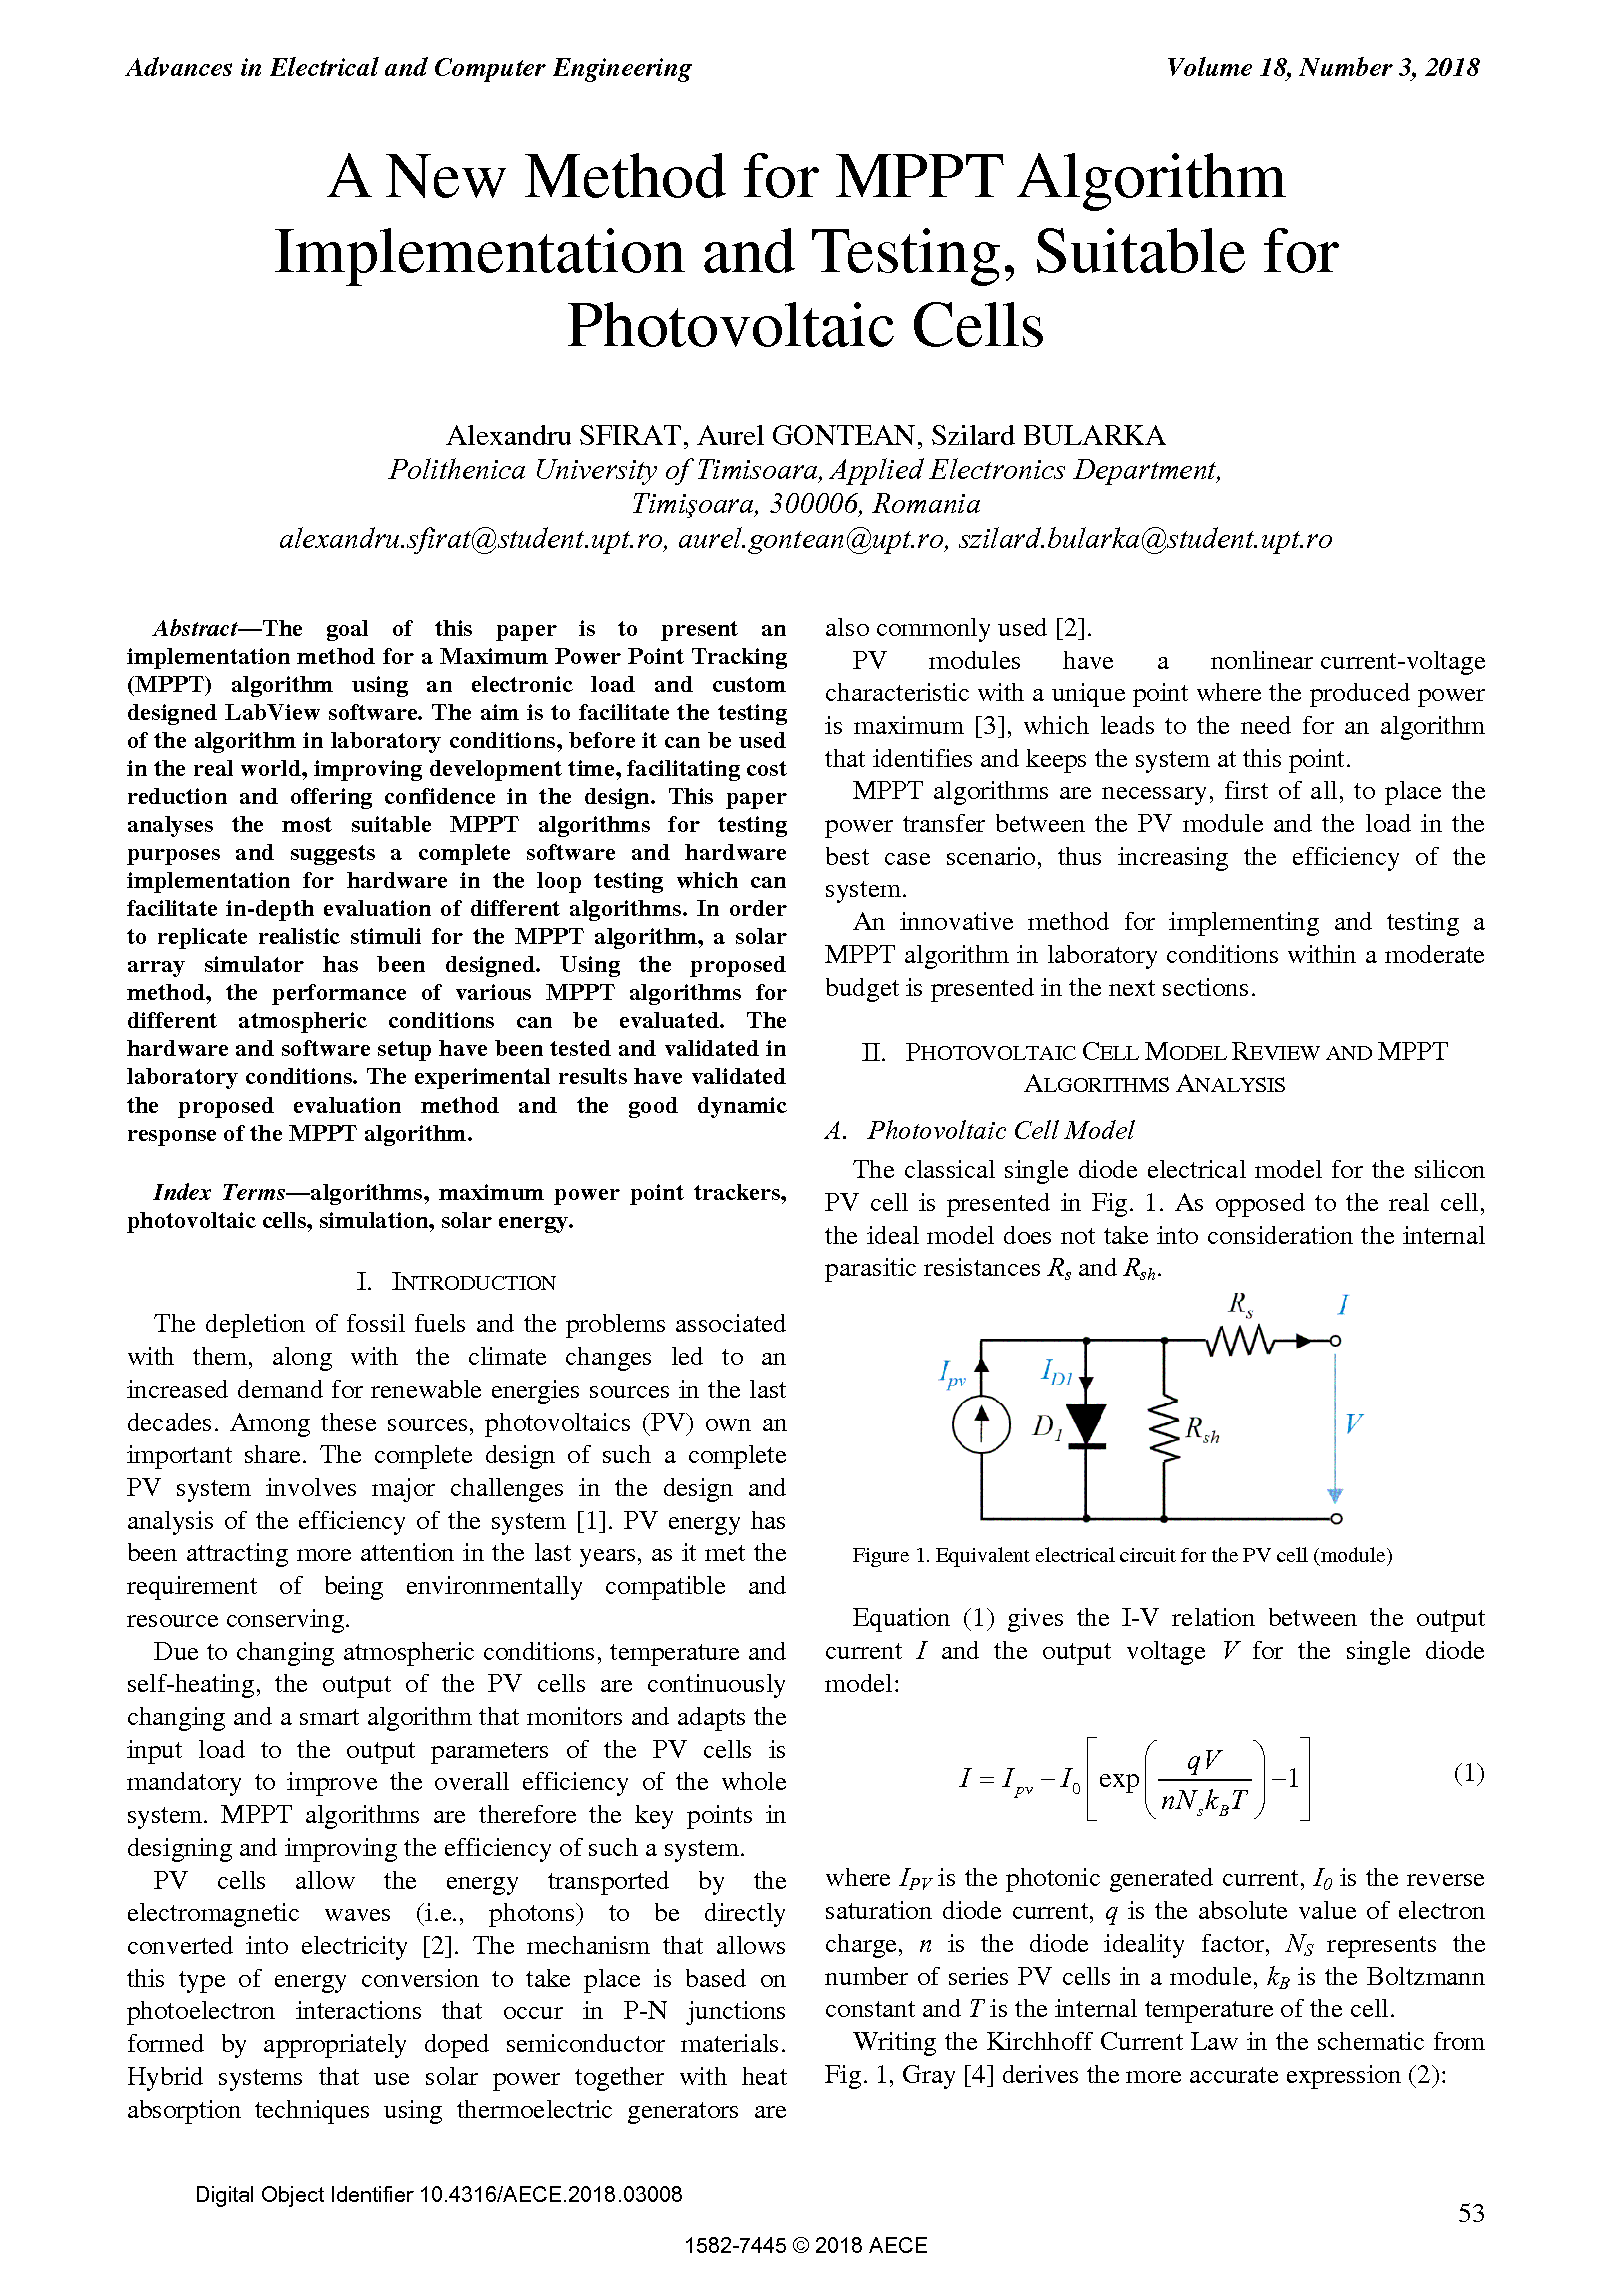 PDF Quickview for paper with DOI:10.4316/AECE.2018.03008